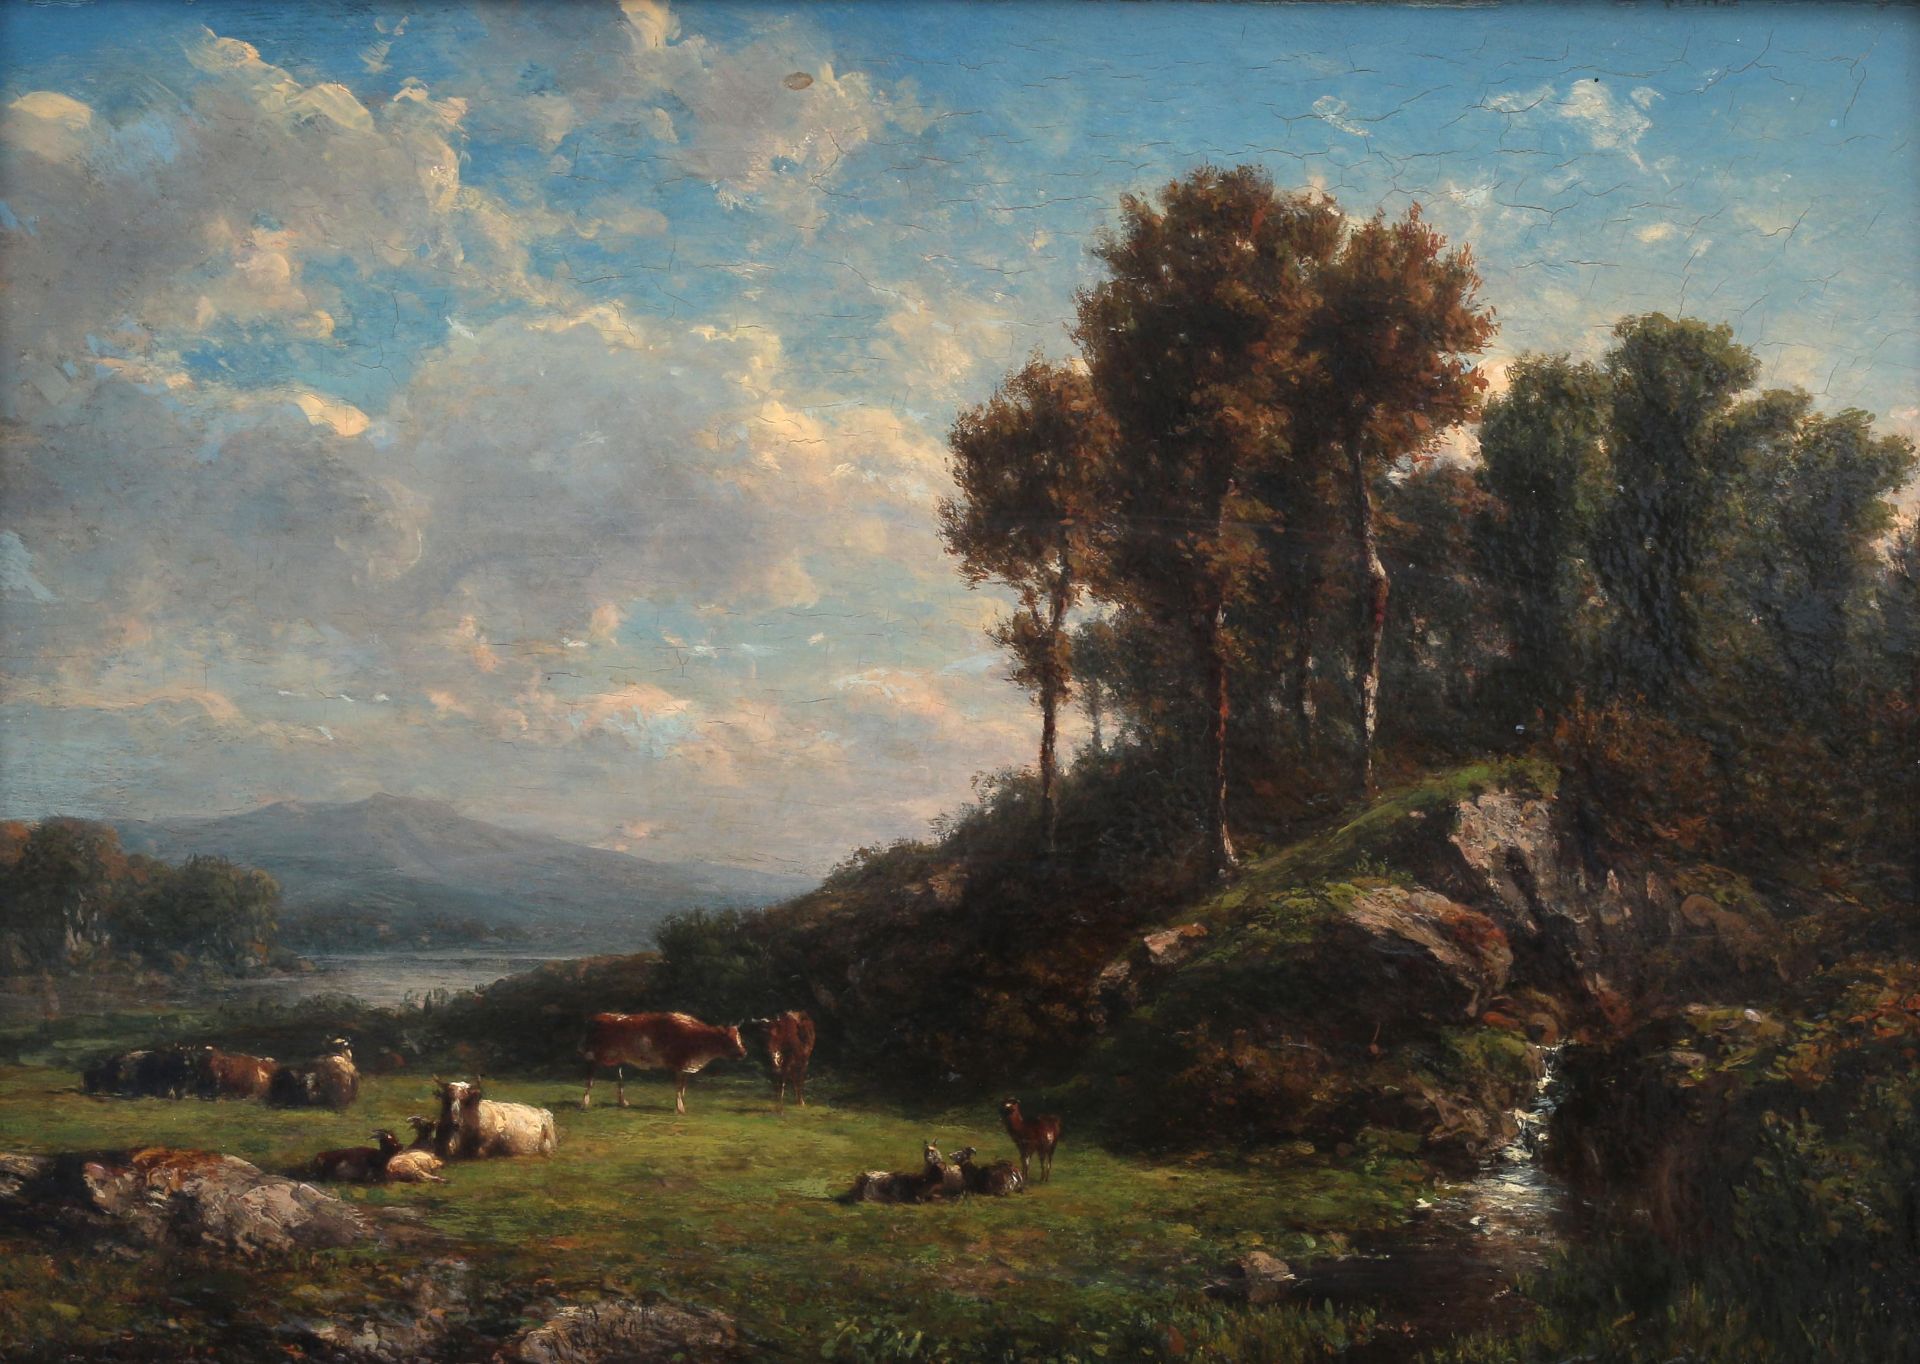 Willem Jan van den Berghe (1823-1901) Landscape with cattle by a waterfall and a view on a